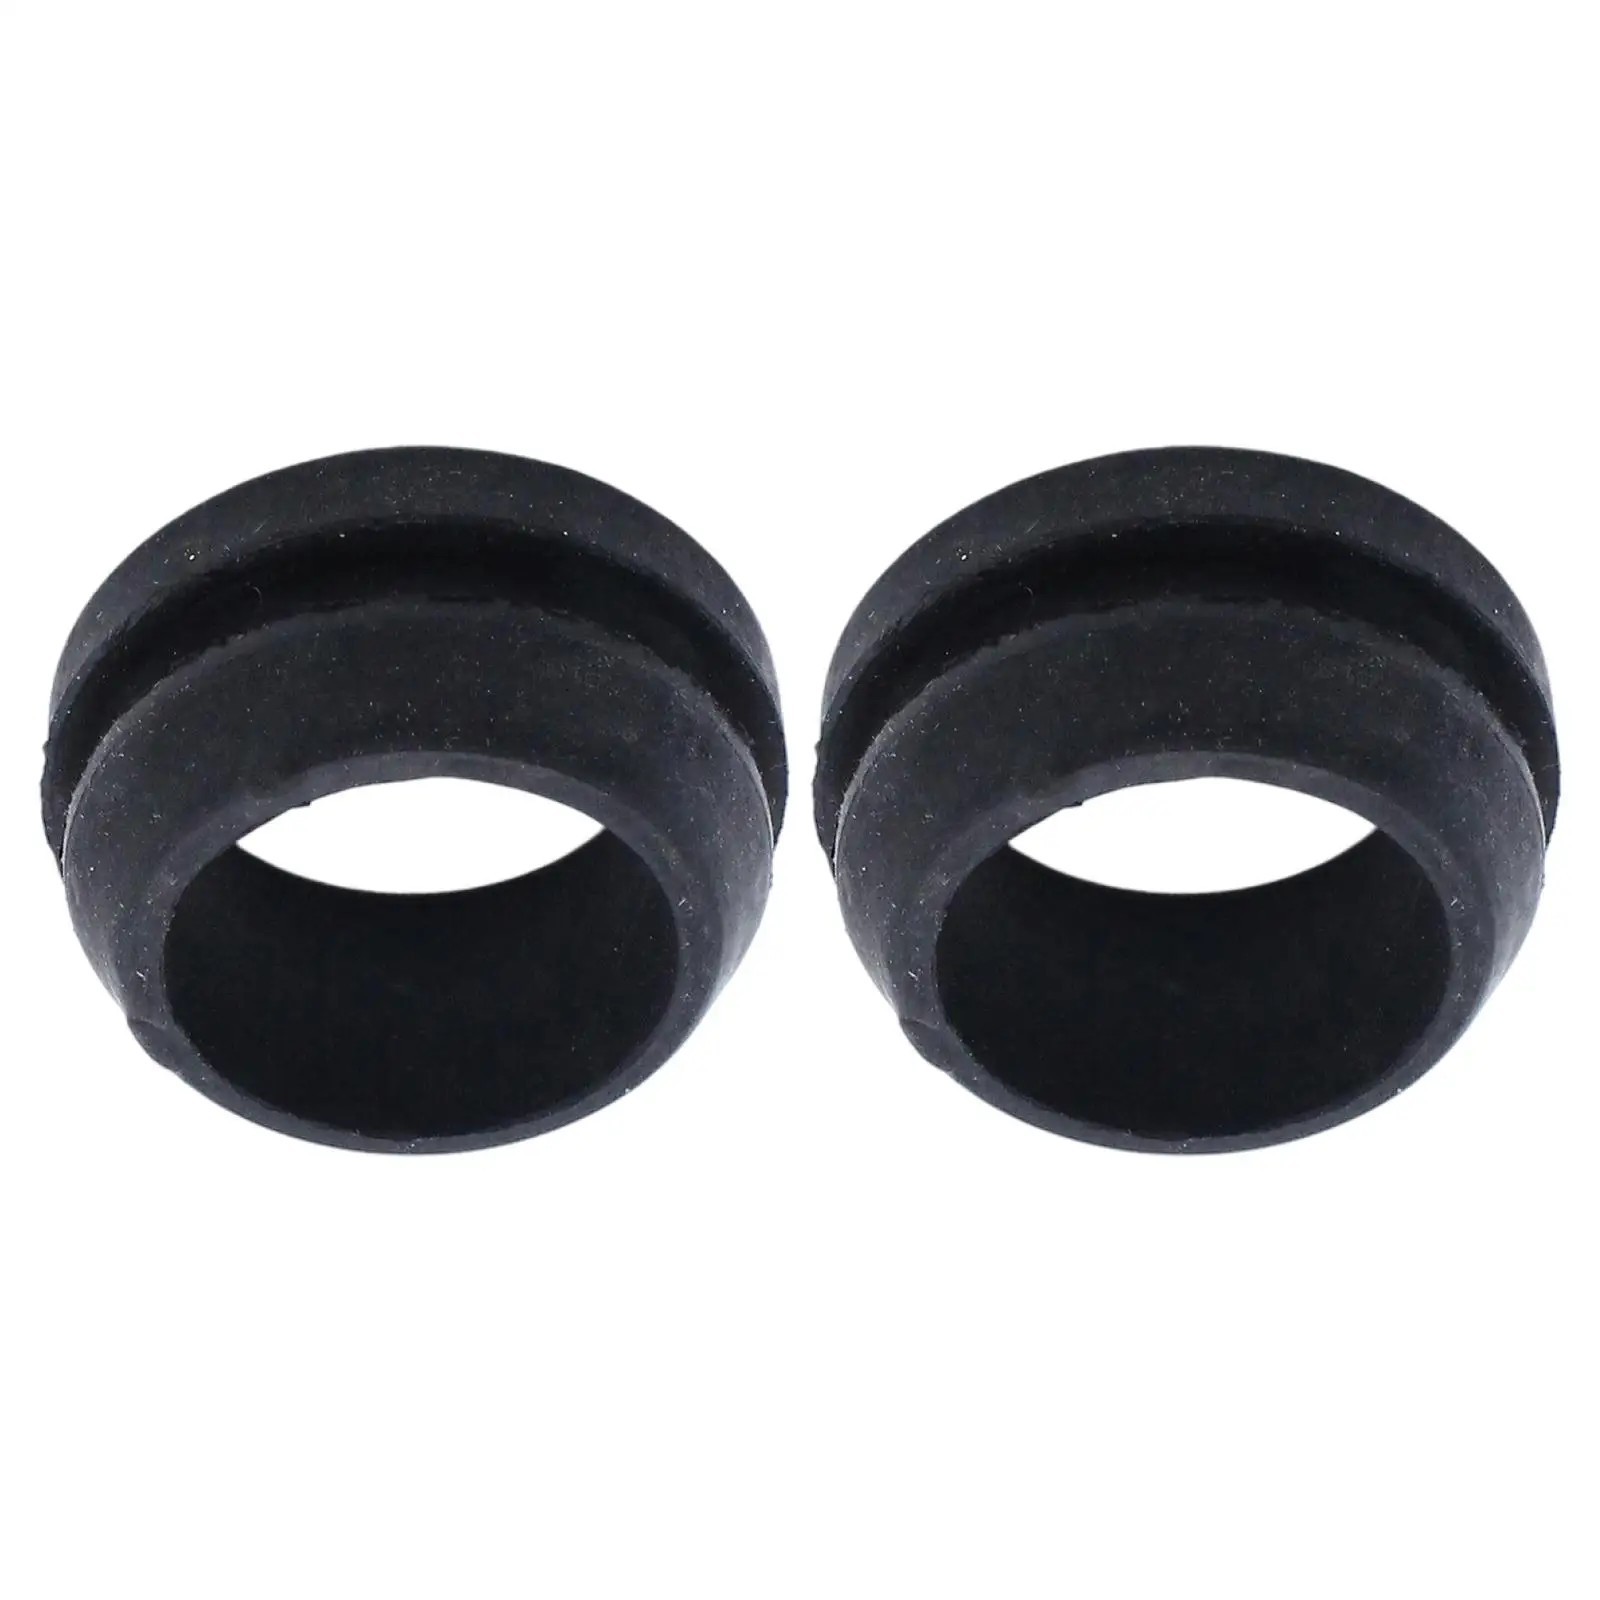 2Pcs High Temp Rubber Breather Pcv Grommets Fit for Metal Valve Cover 4880 4998